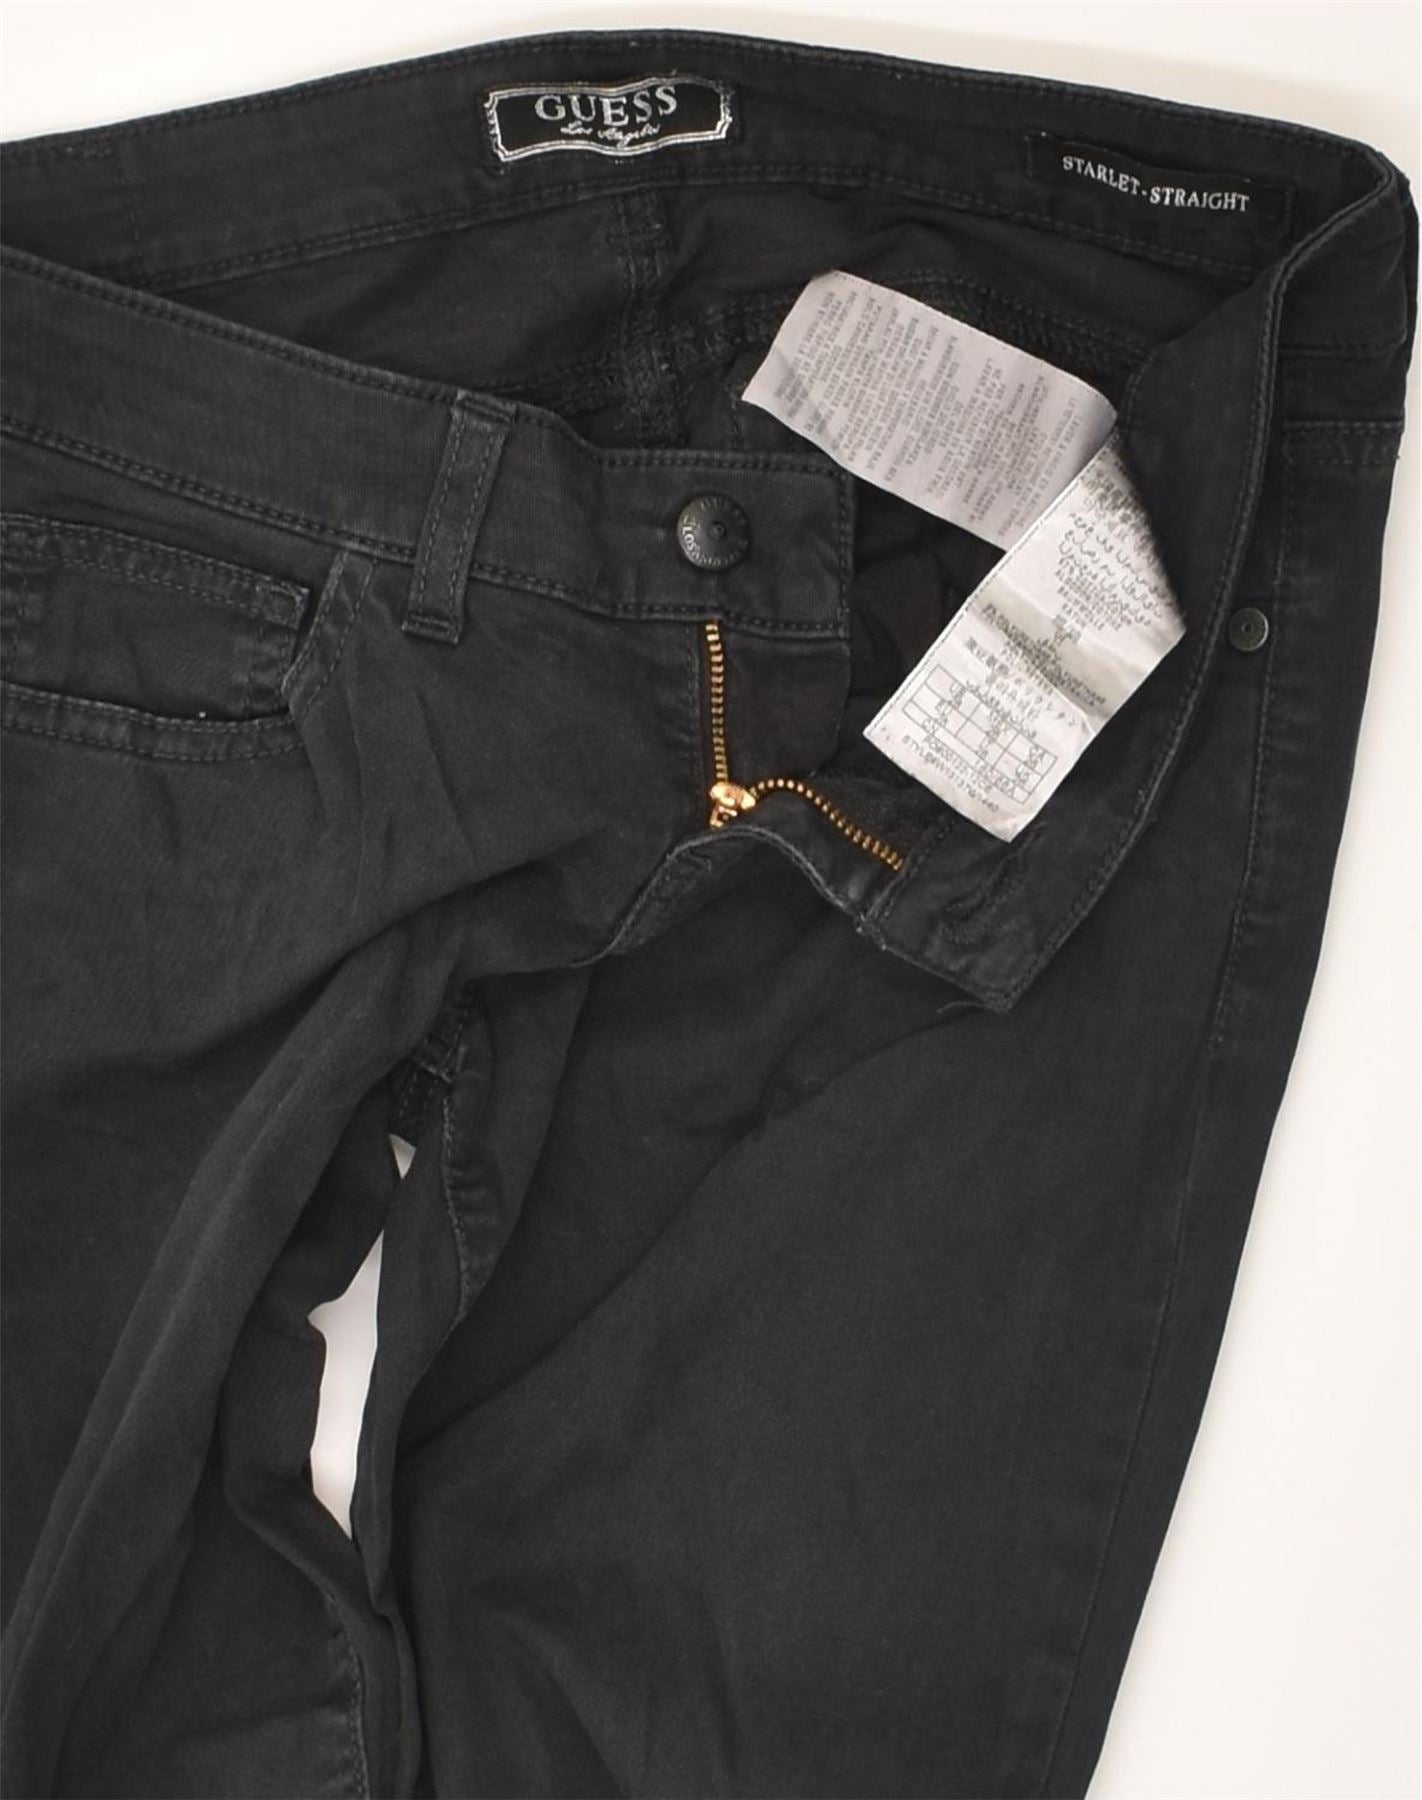 Guess | Jeans | Guess Black Distressed Skinny Jeans | Poshmark